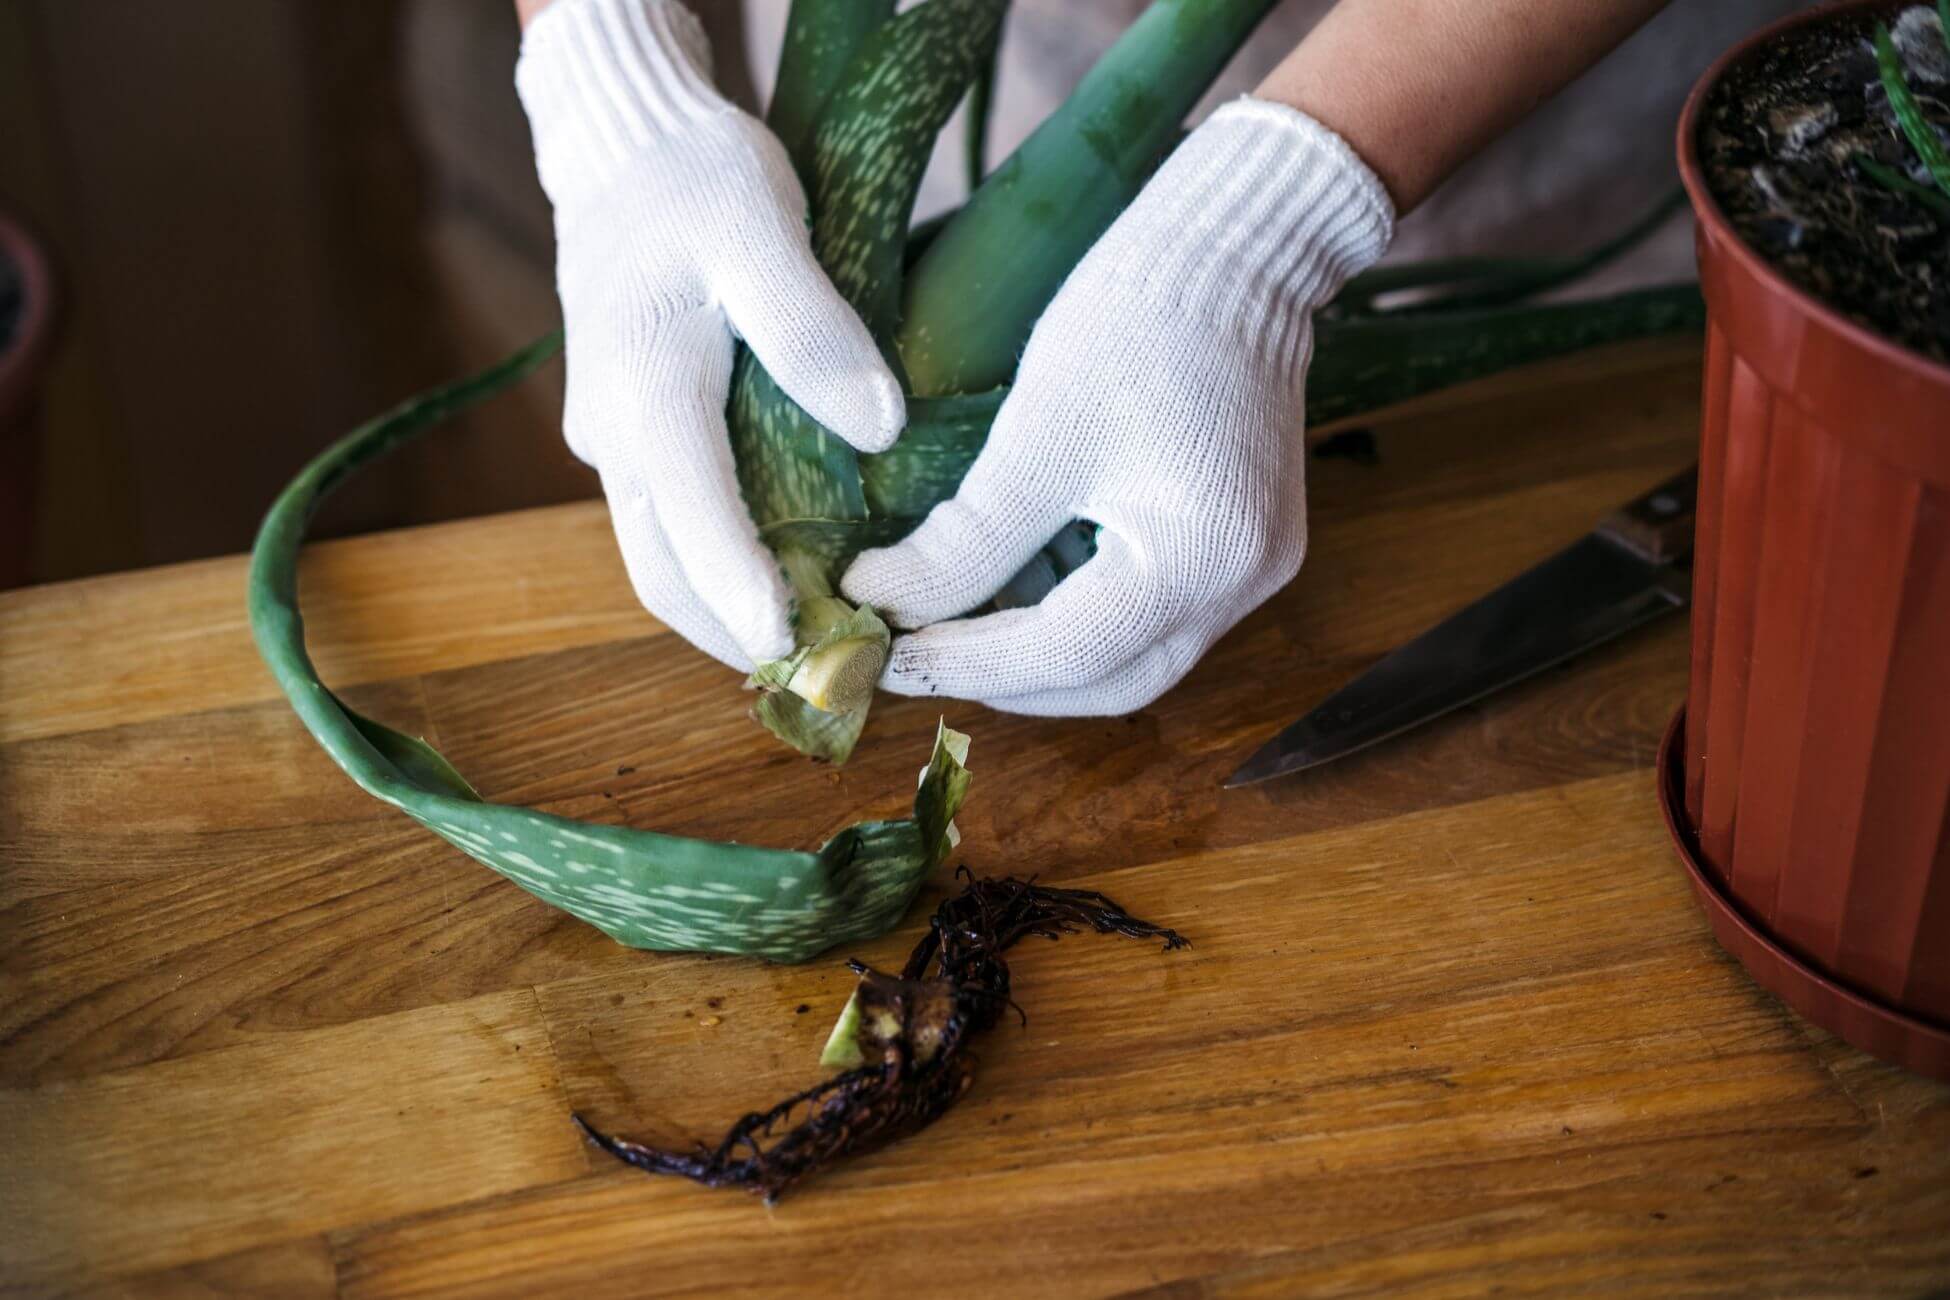 Person wearing white gloves is holding the base of an aloe vera plant on a wooden table, preparing to replant it. 